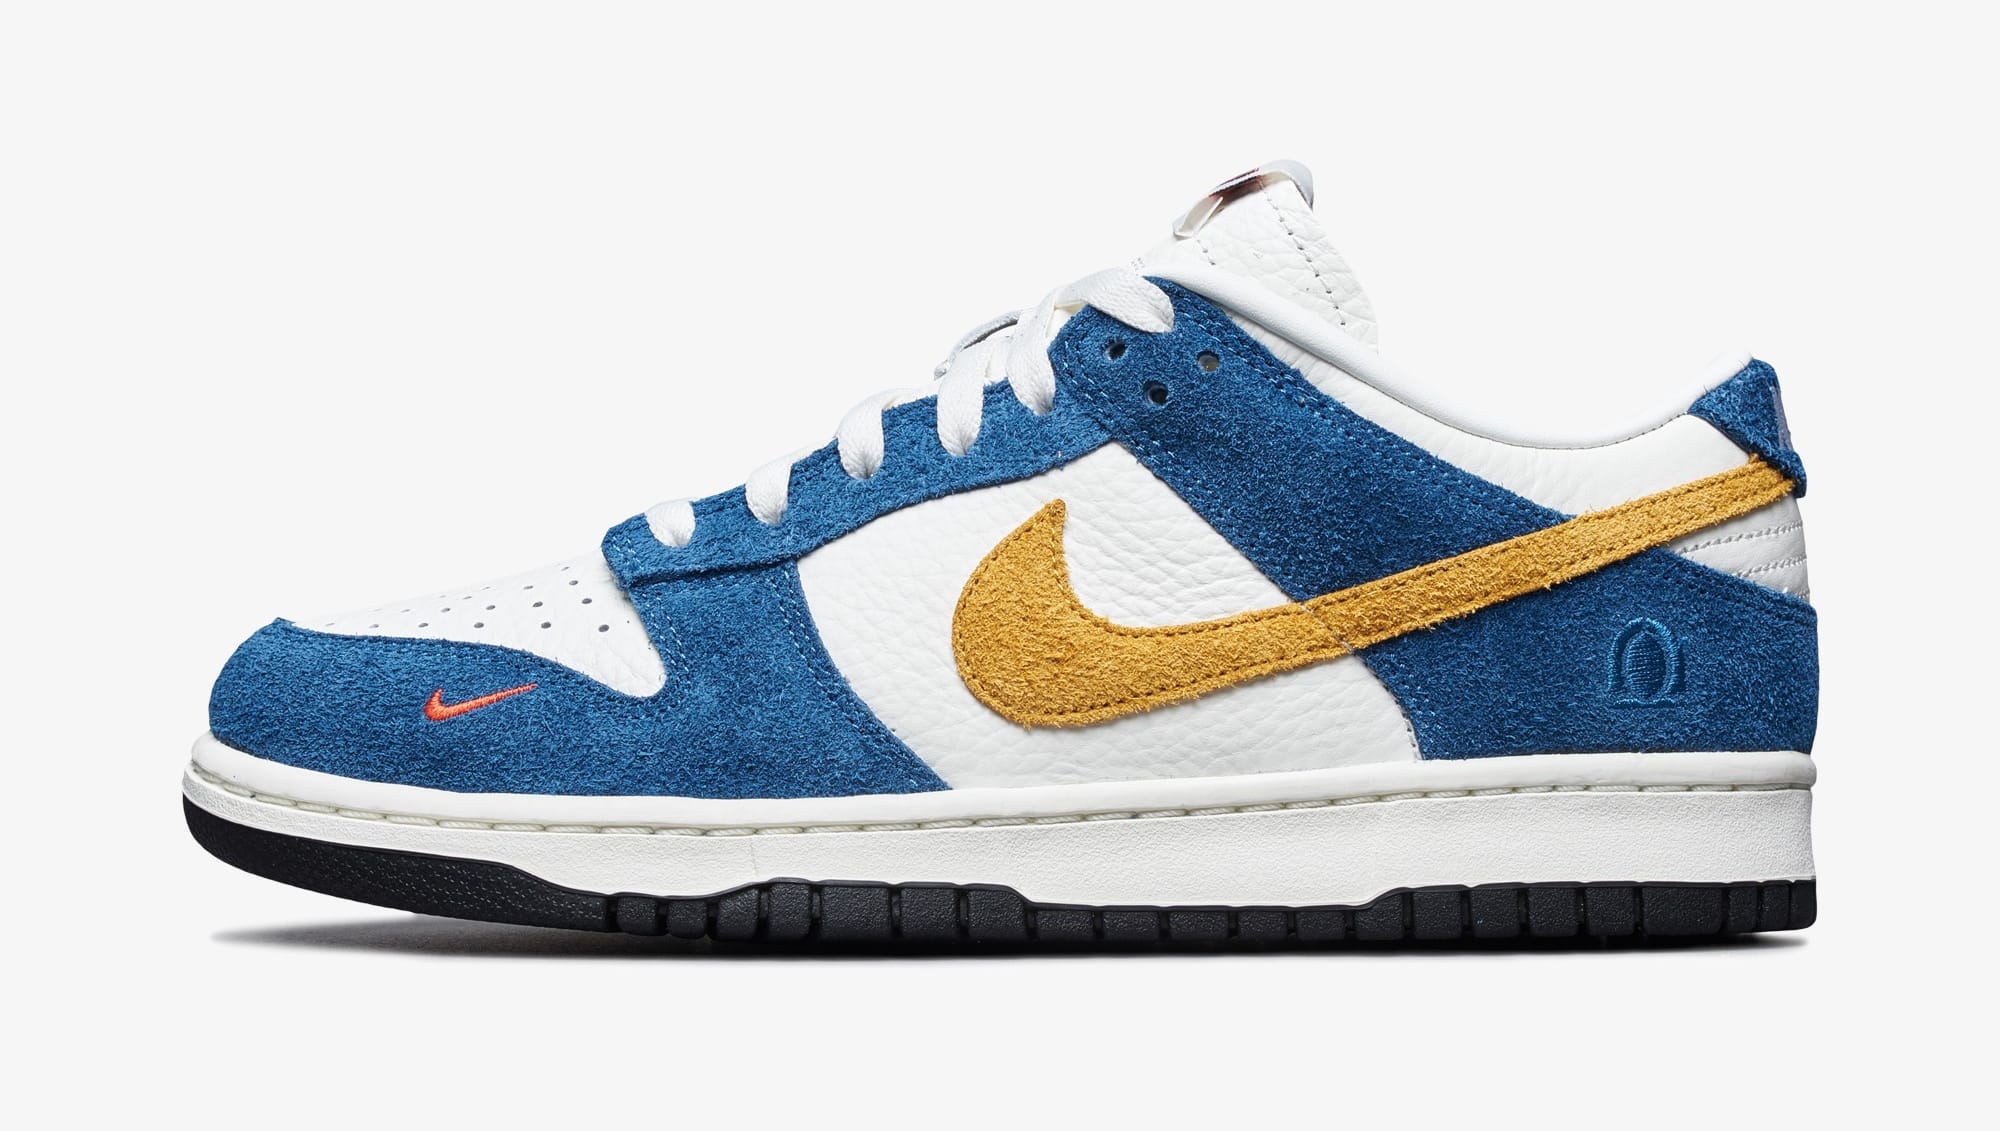 Nike Dunk SB Release Dates: Complete Guide 2020-21 |